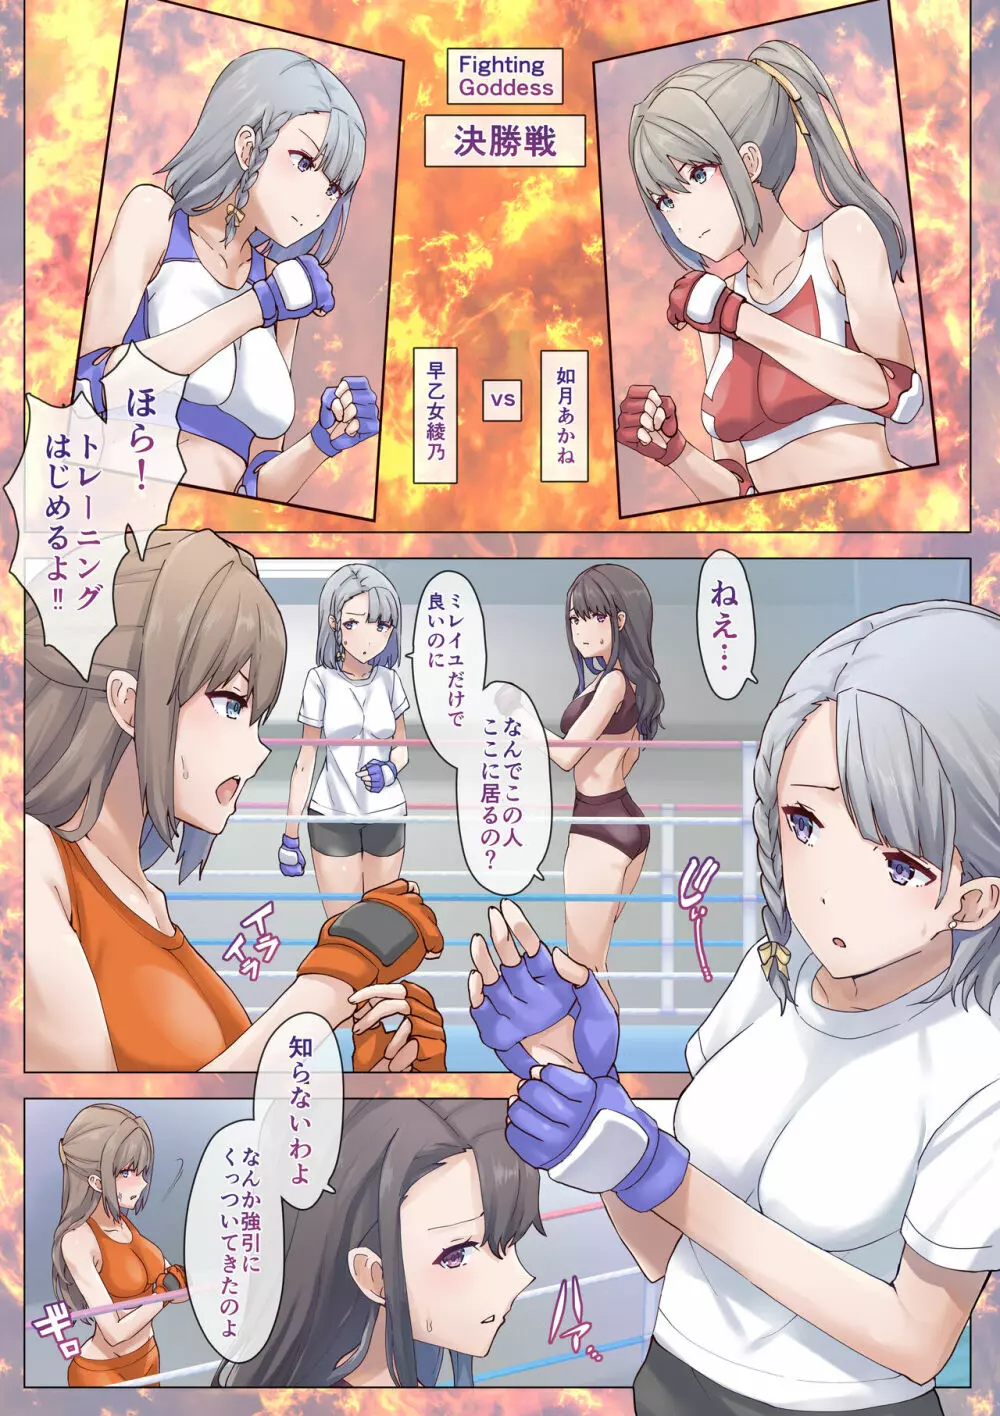 Fighting Goddess S1-5 Page.3